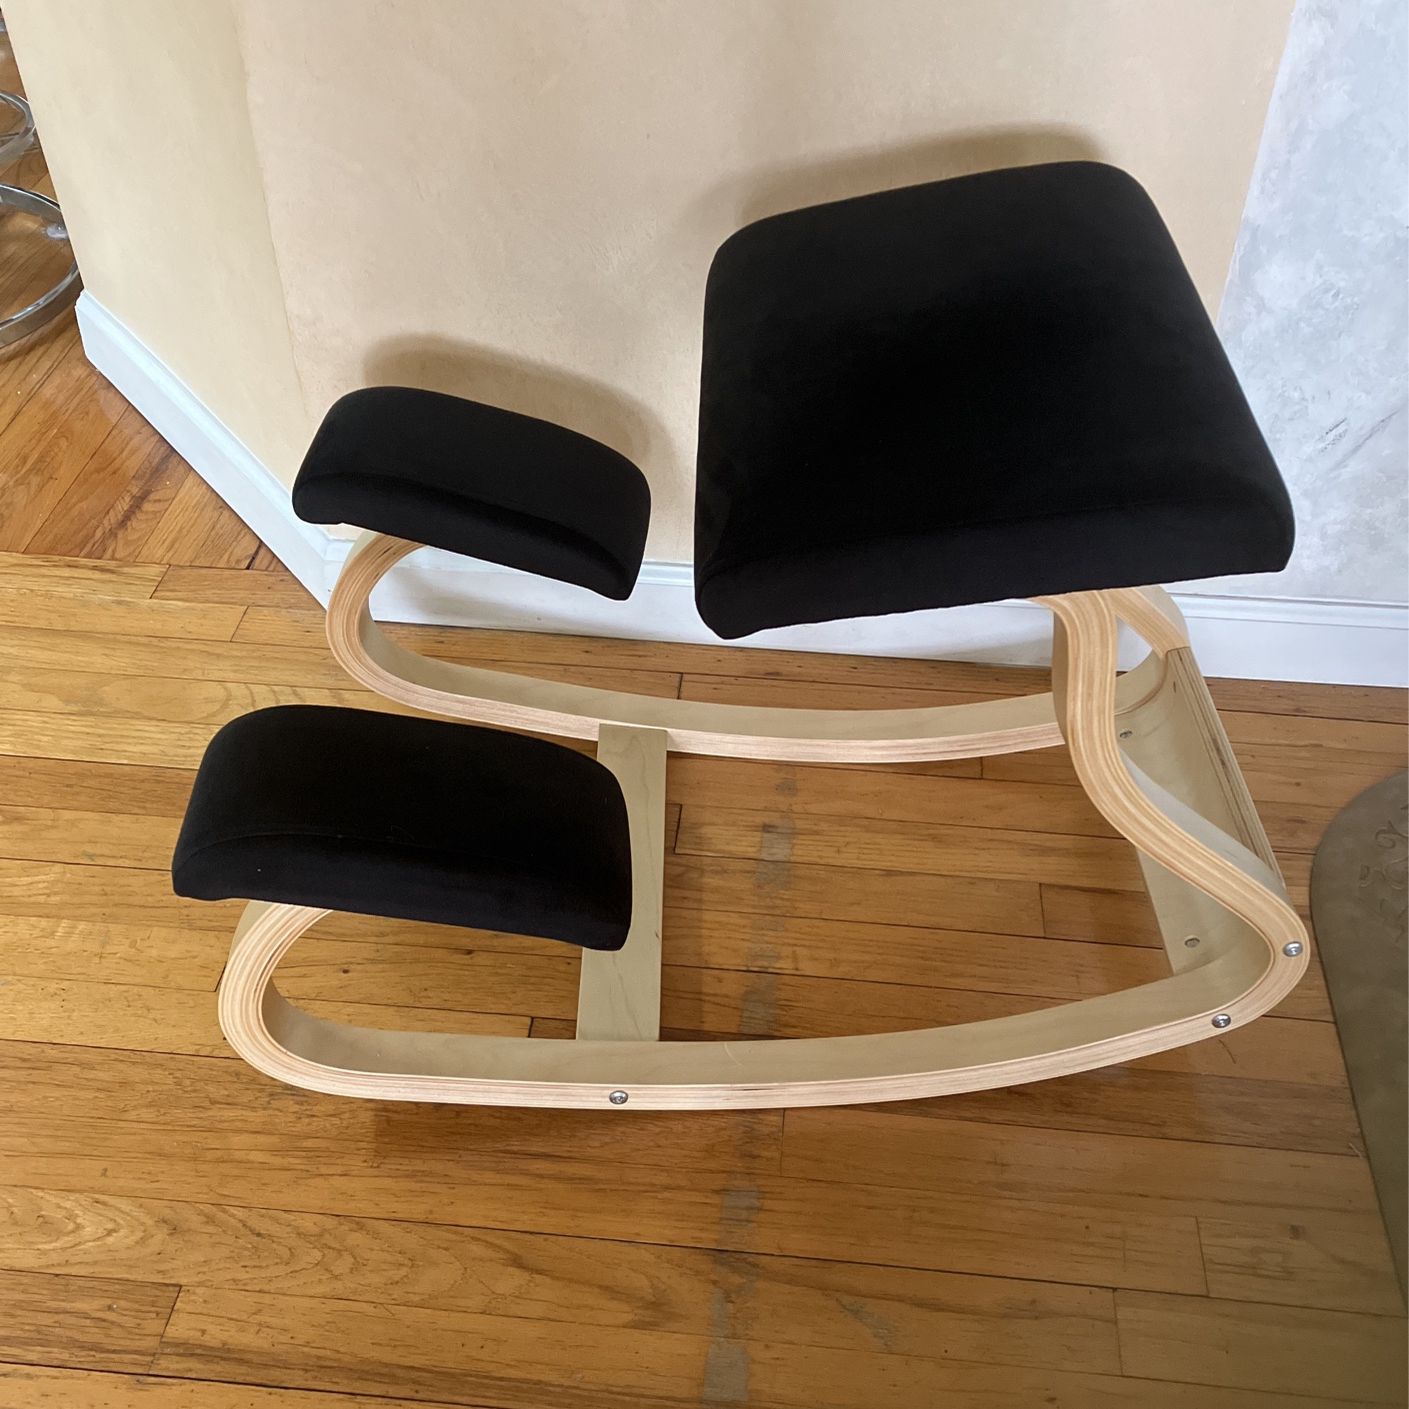 luxton-home-ergonomic-chair-work-from-home-posture-chair-with-extra-padding-luxt1018.html?piid  for Sale in Massapequa Park, NY - OfferUp